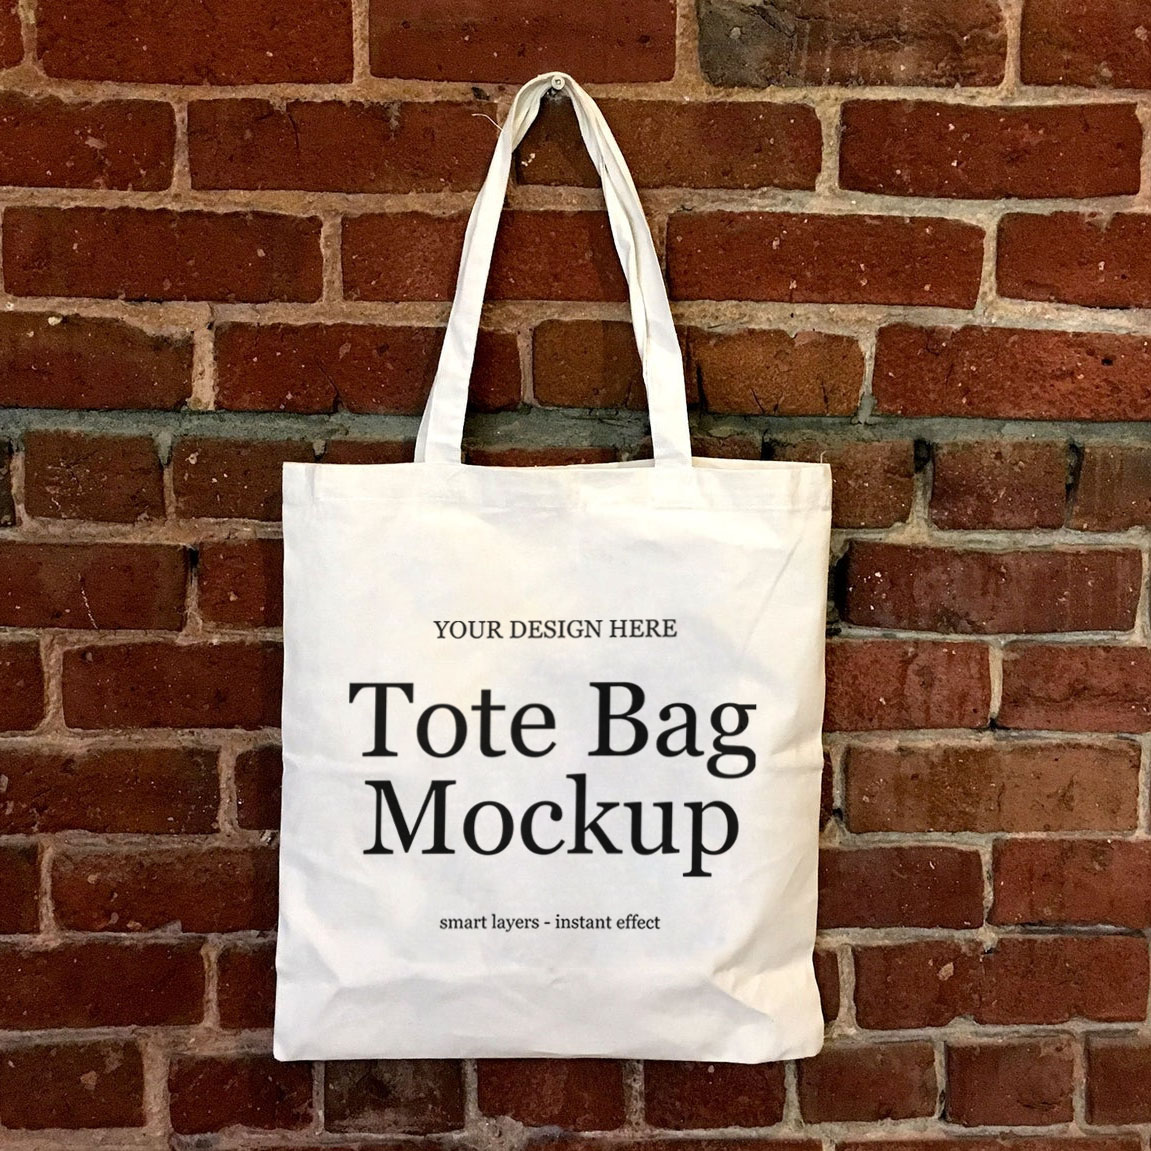 Free PSD White Canvas Tote Bag Mockup Download 34 by XOVYANT on DeviantArt